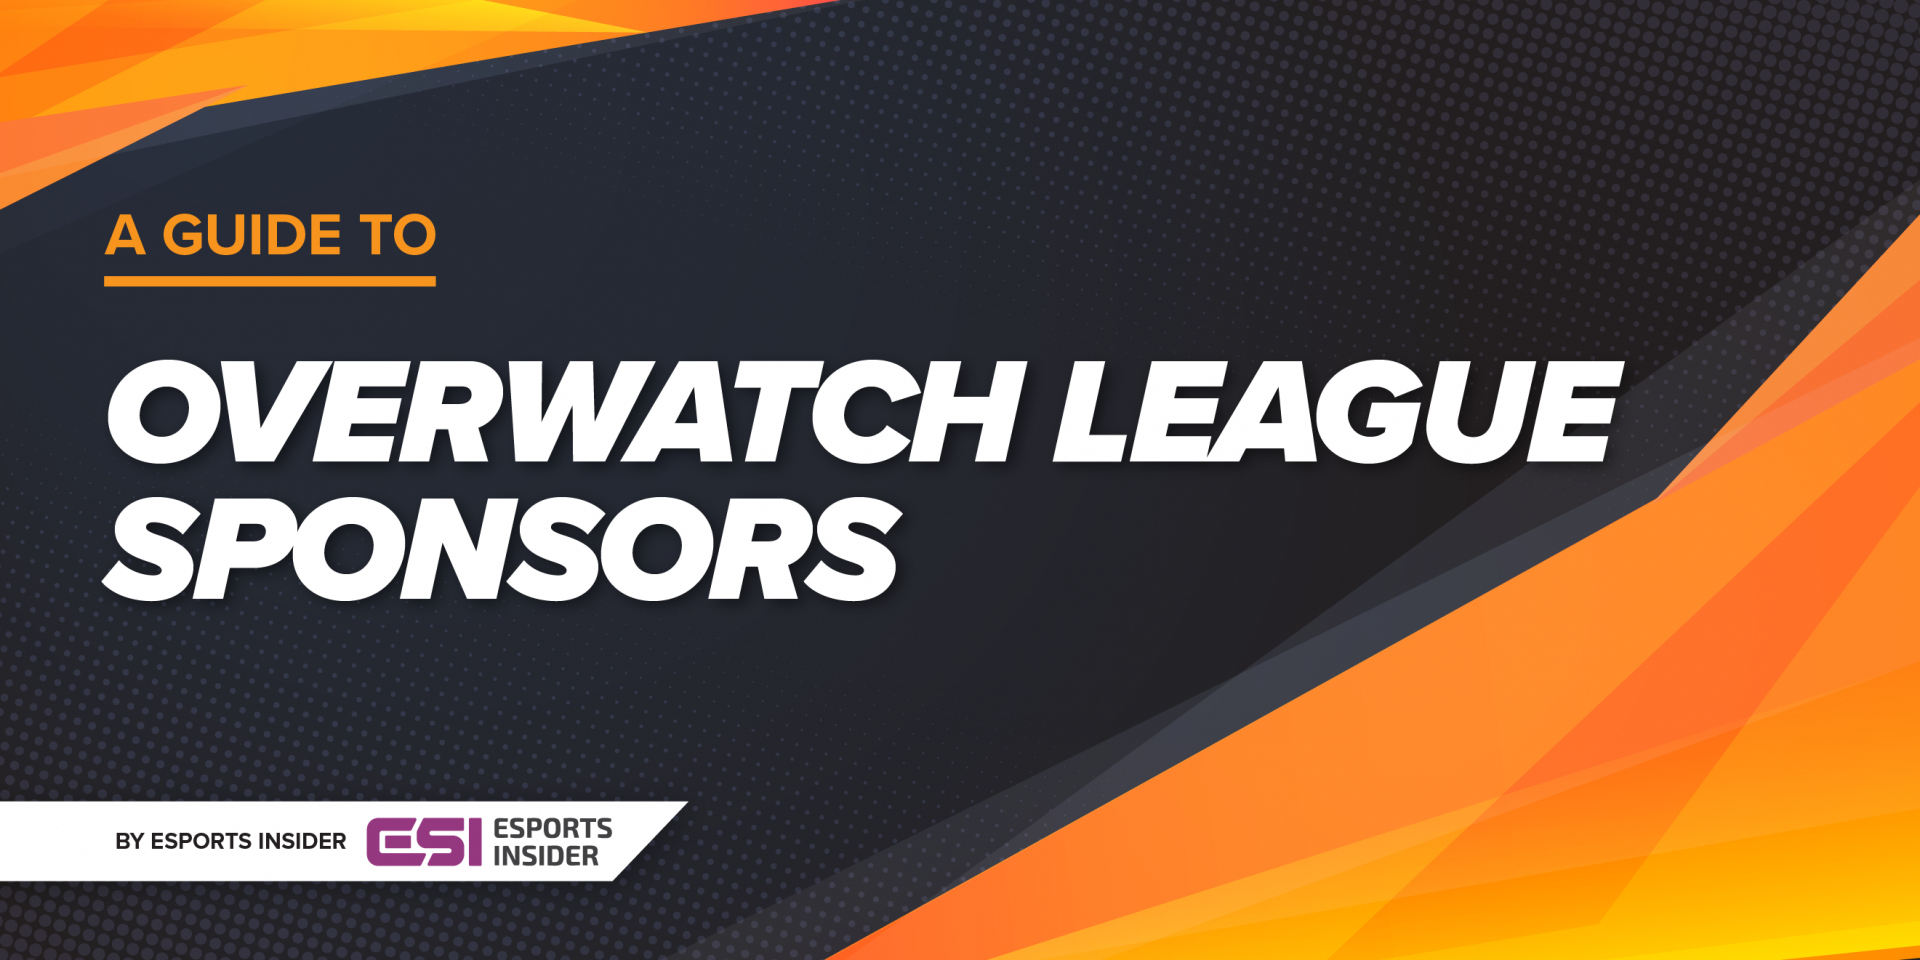 A guide to Overwatch League sponsors, past and present